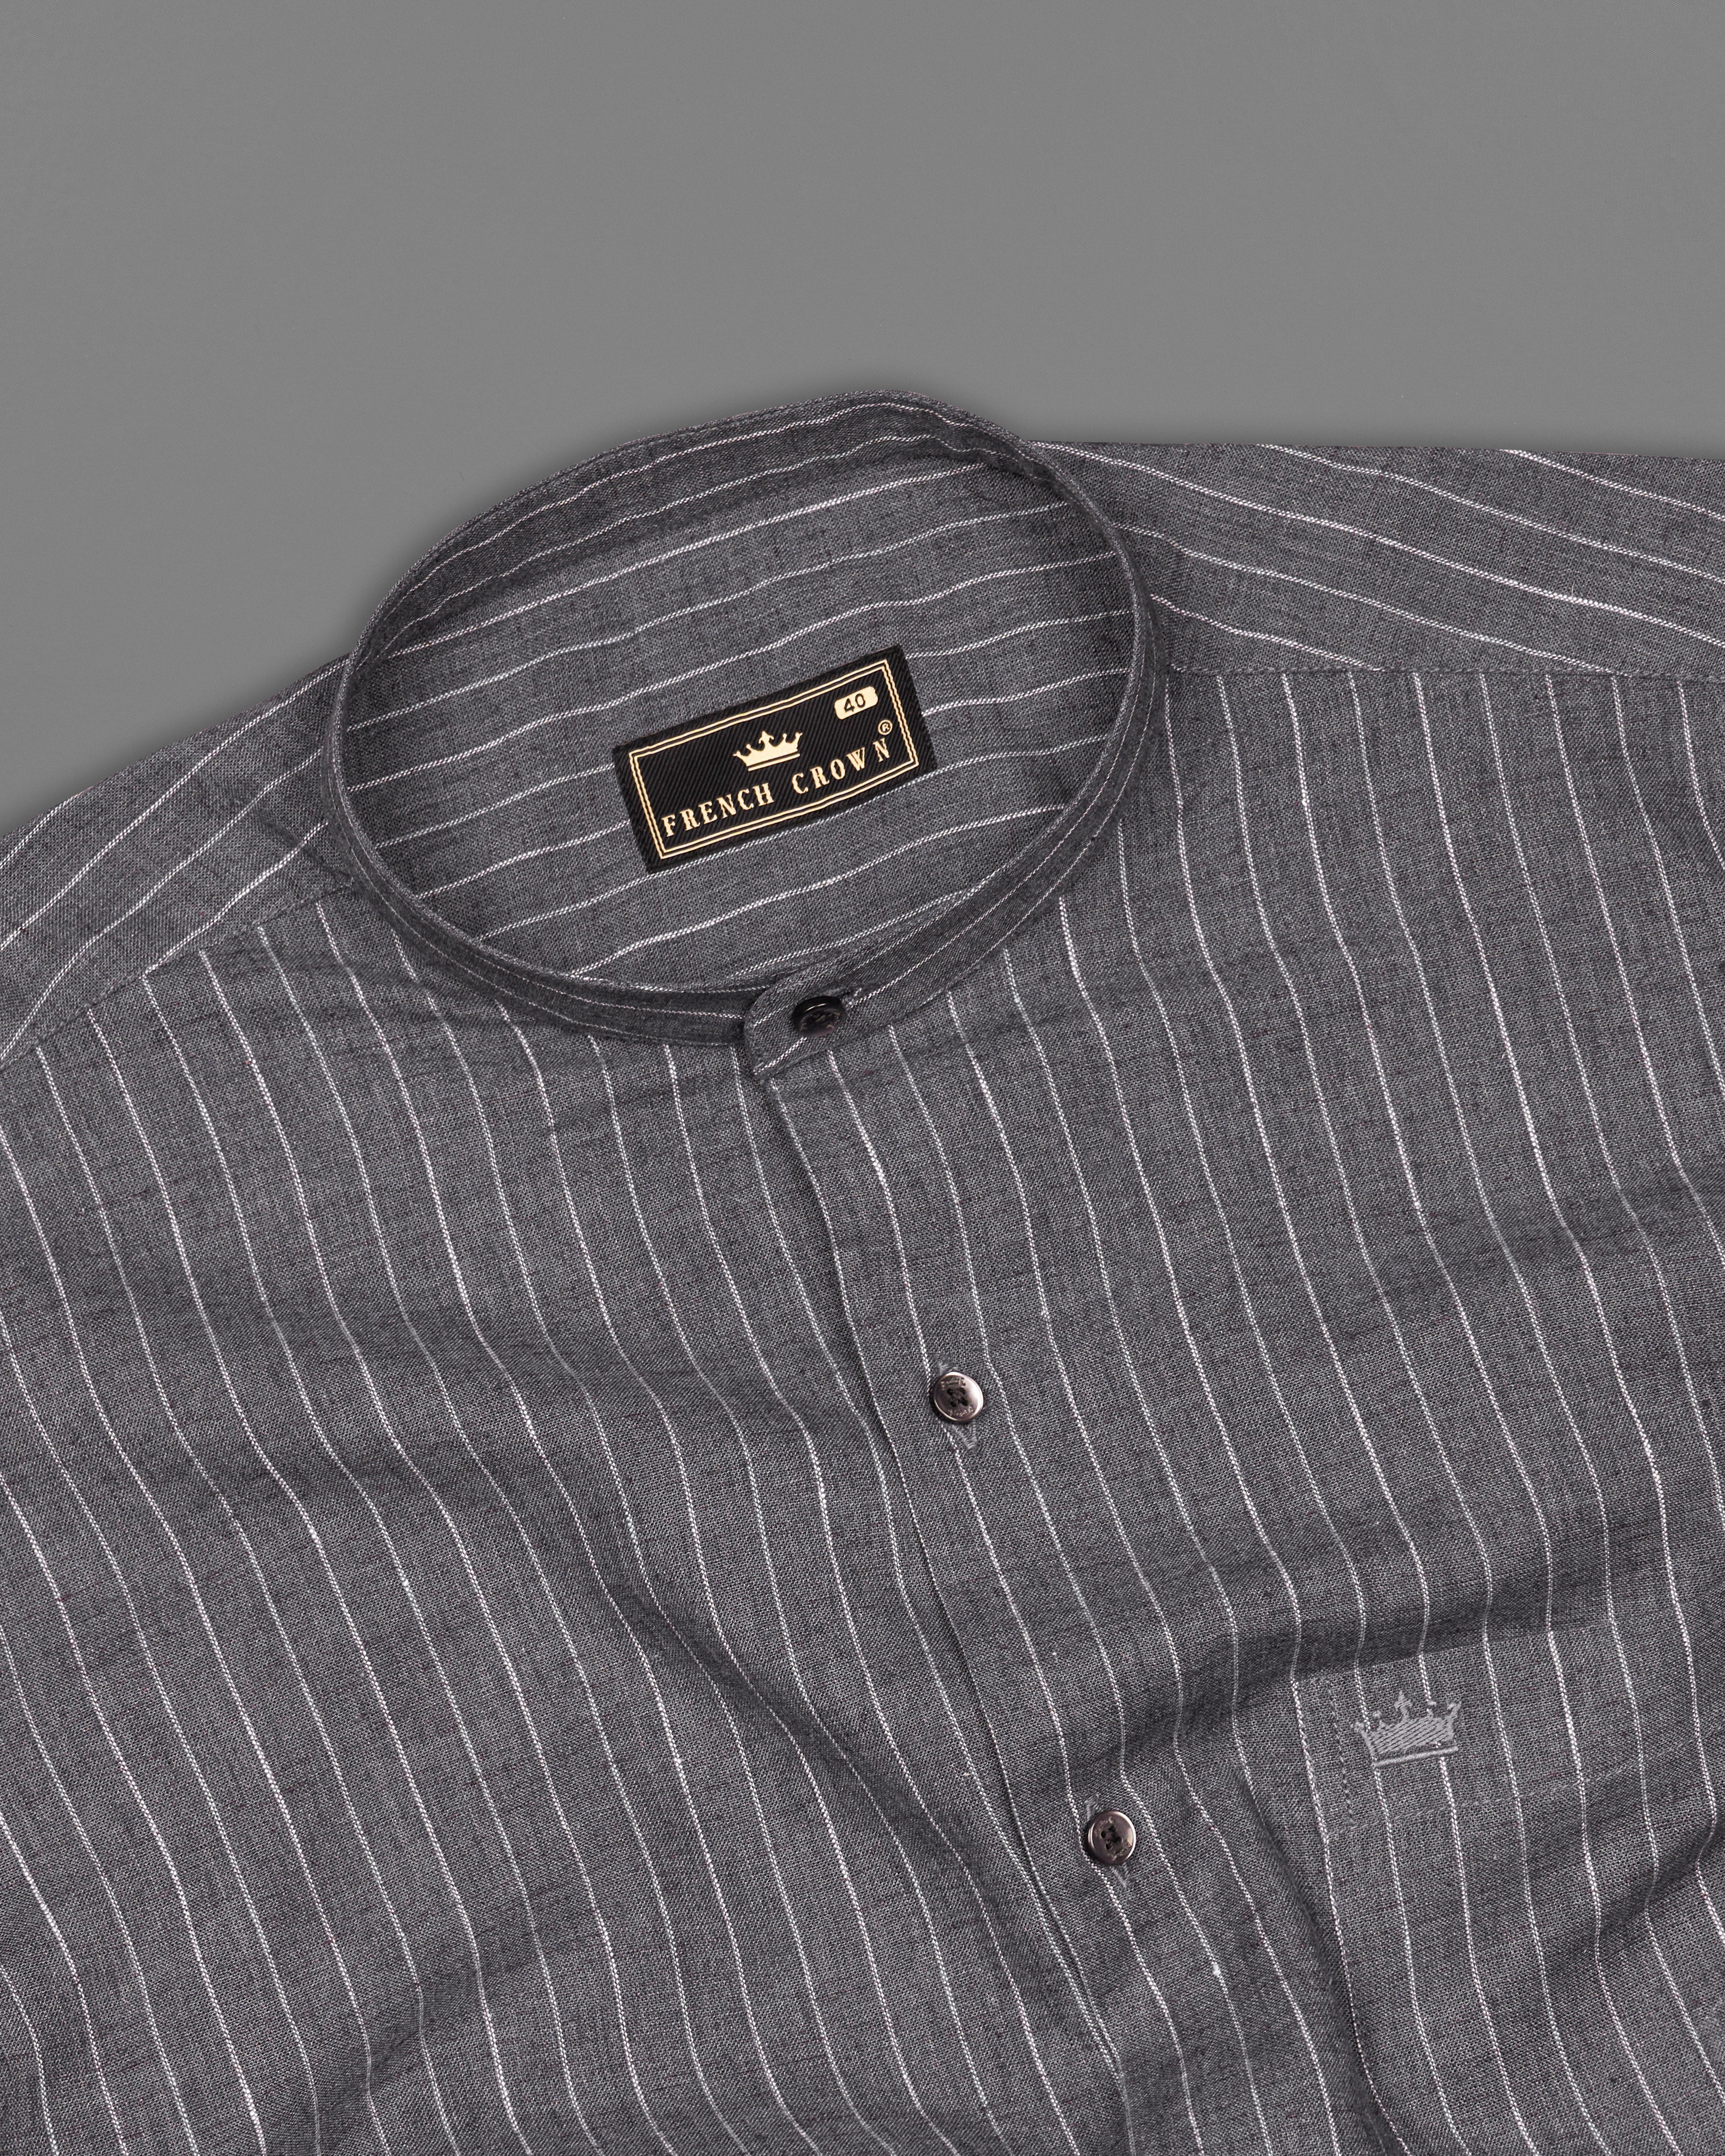 Vampire Gray with White Striped Luxurious Linen Half Slavees Shirt 9641-M-BLK-SS-H-38, 9641-M-BLK-SS-H-39, 9641-M-BLK-SS-H-40, 9641-M-BLK-SS-H-42, 9641-M-BLK-SS-H-44, 9641-M-BLK-SS-H-46, 9641-M-BLK-SS-H-48, 9641-M-BLK-SS-H-50, 9641-M-BLK-SS-H-52